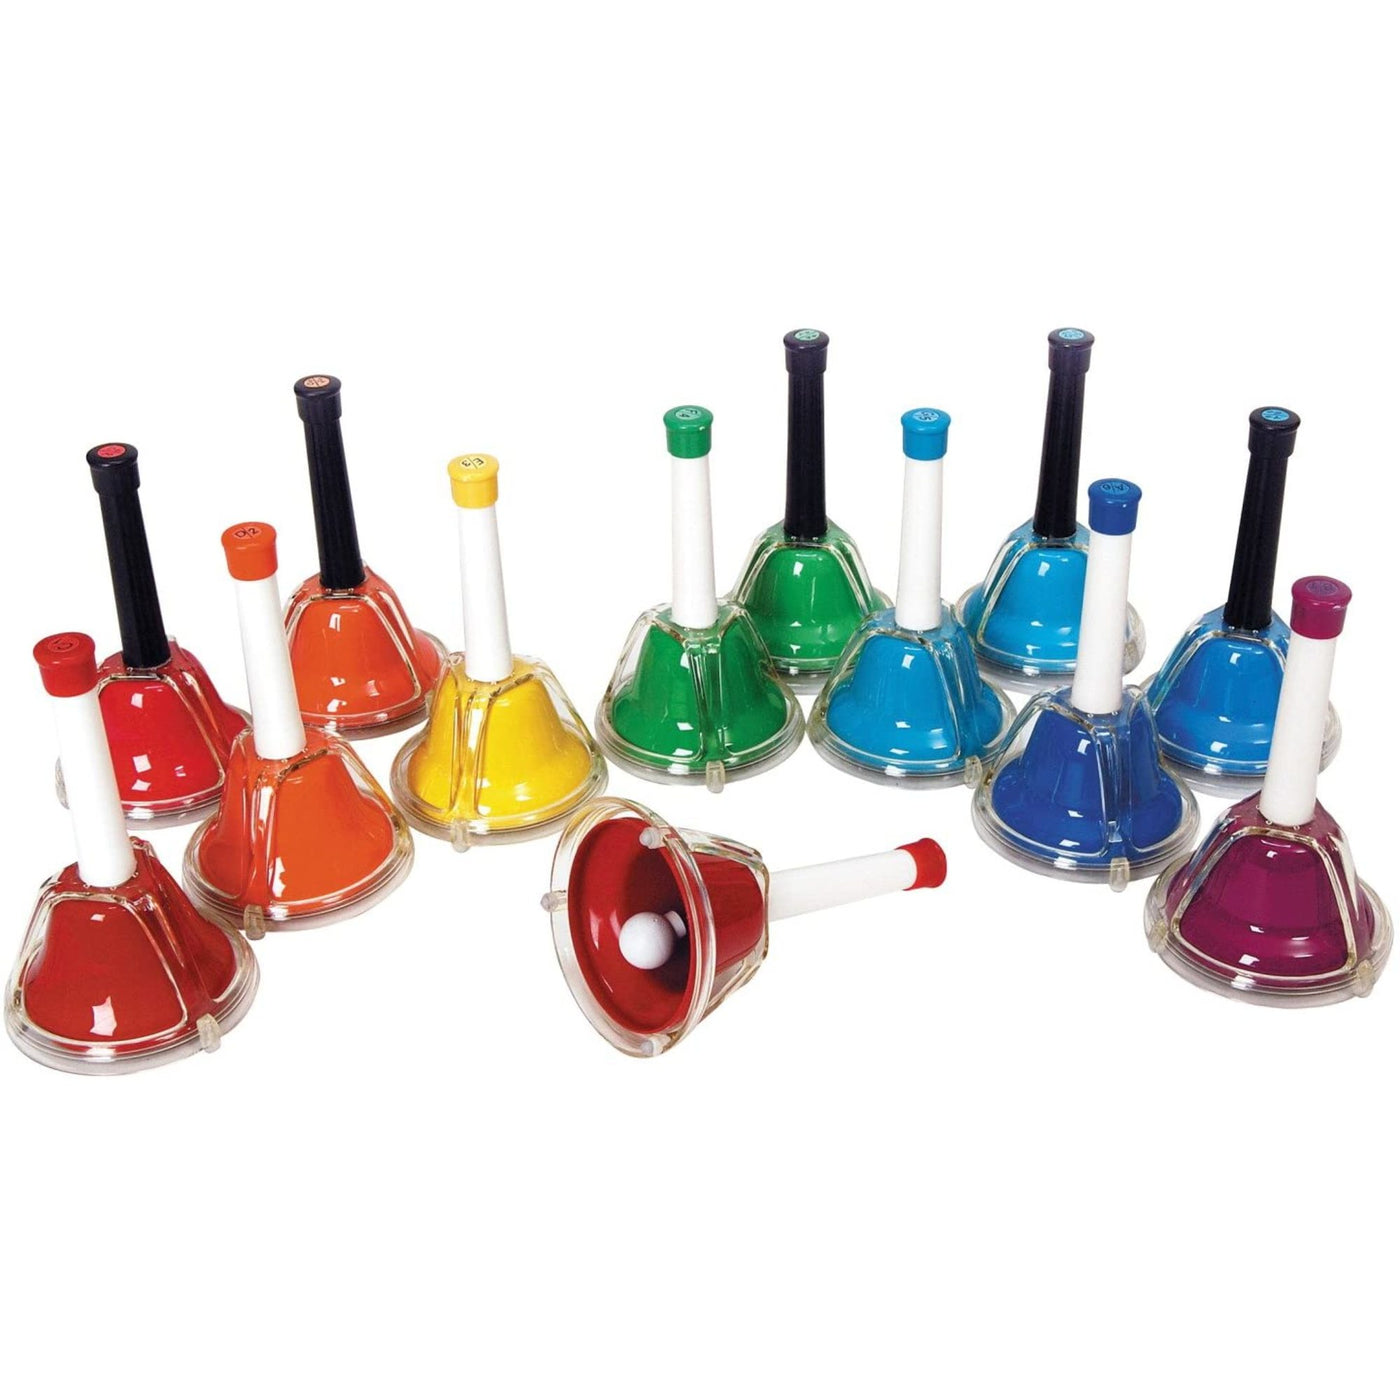 Rhythm Band Colored 13-Note Combination Handbell/Desk Bell Set (RB117)